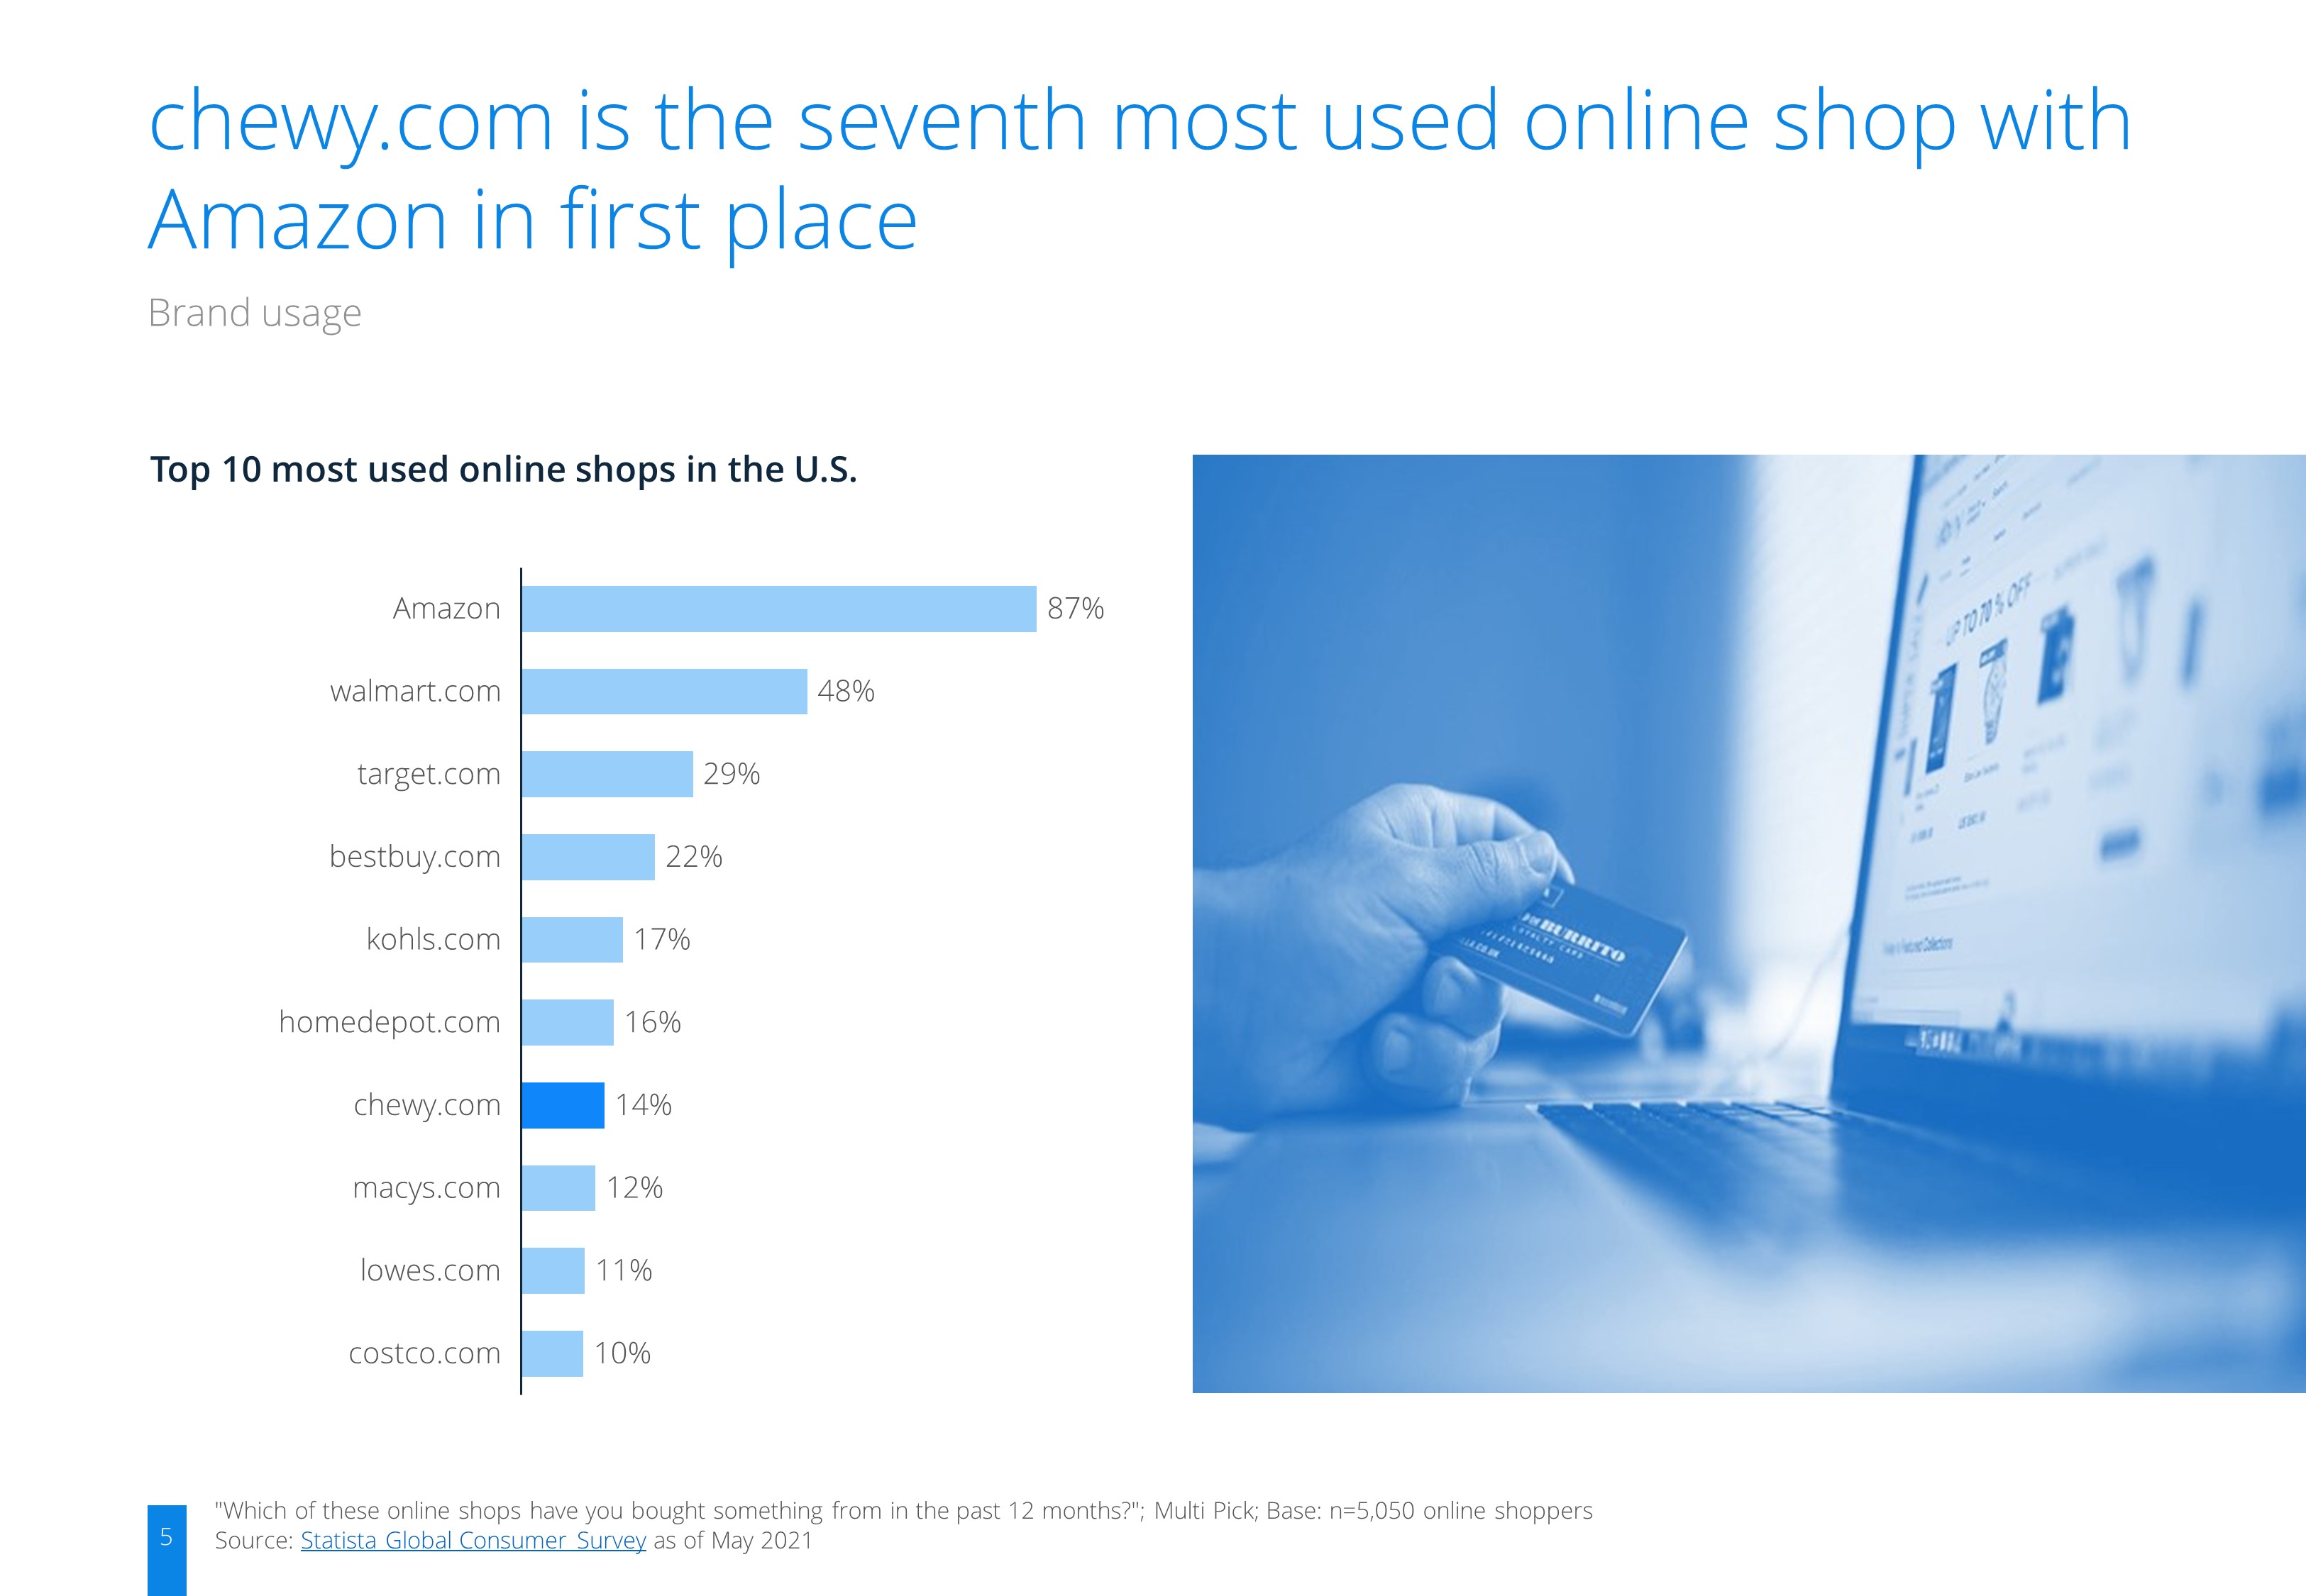 ecommerceDB Infographic: ecommerce_chewy.com_Brand_Report_United States_2021_1.jpg